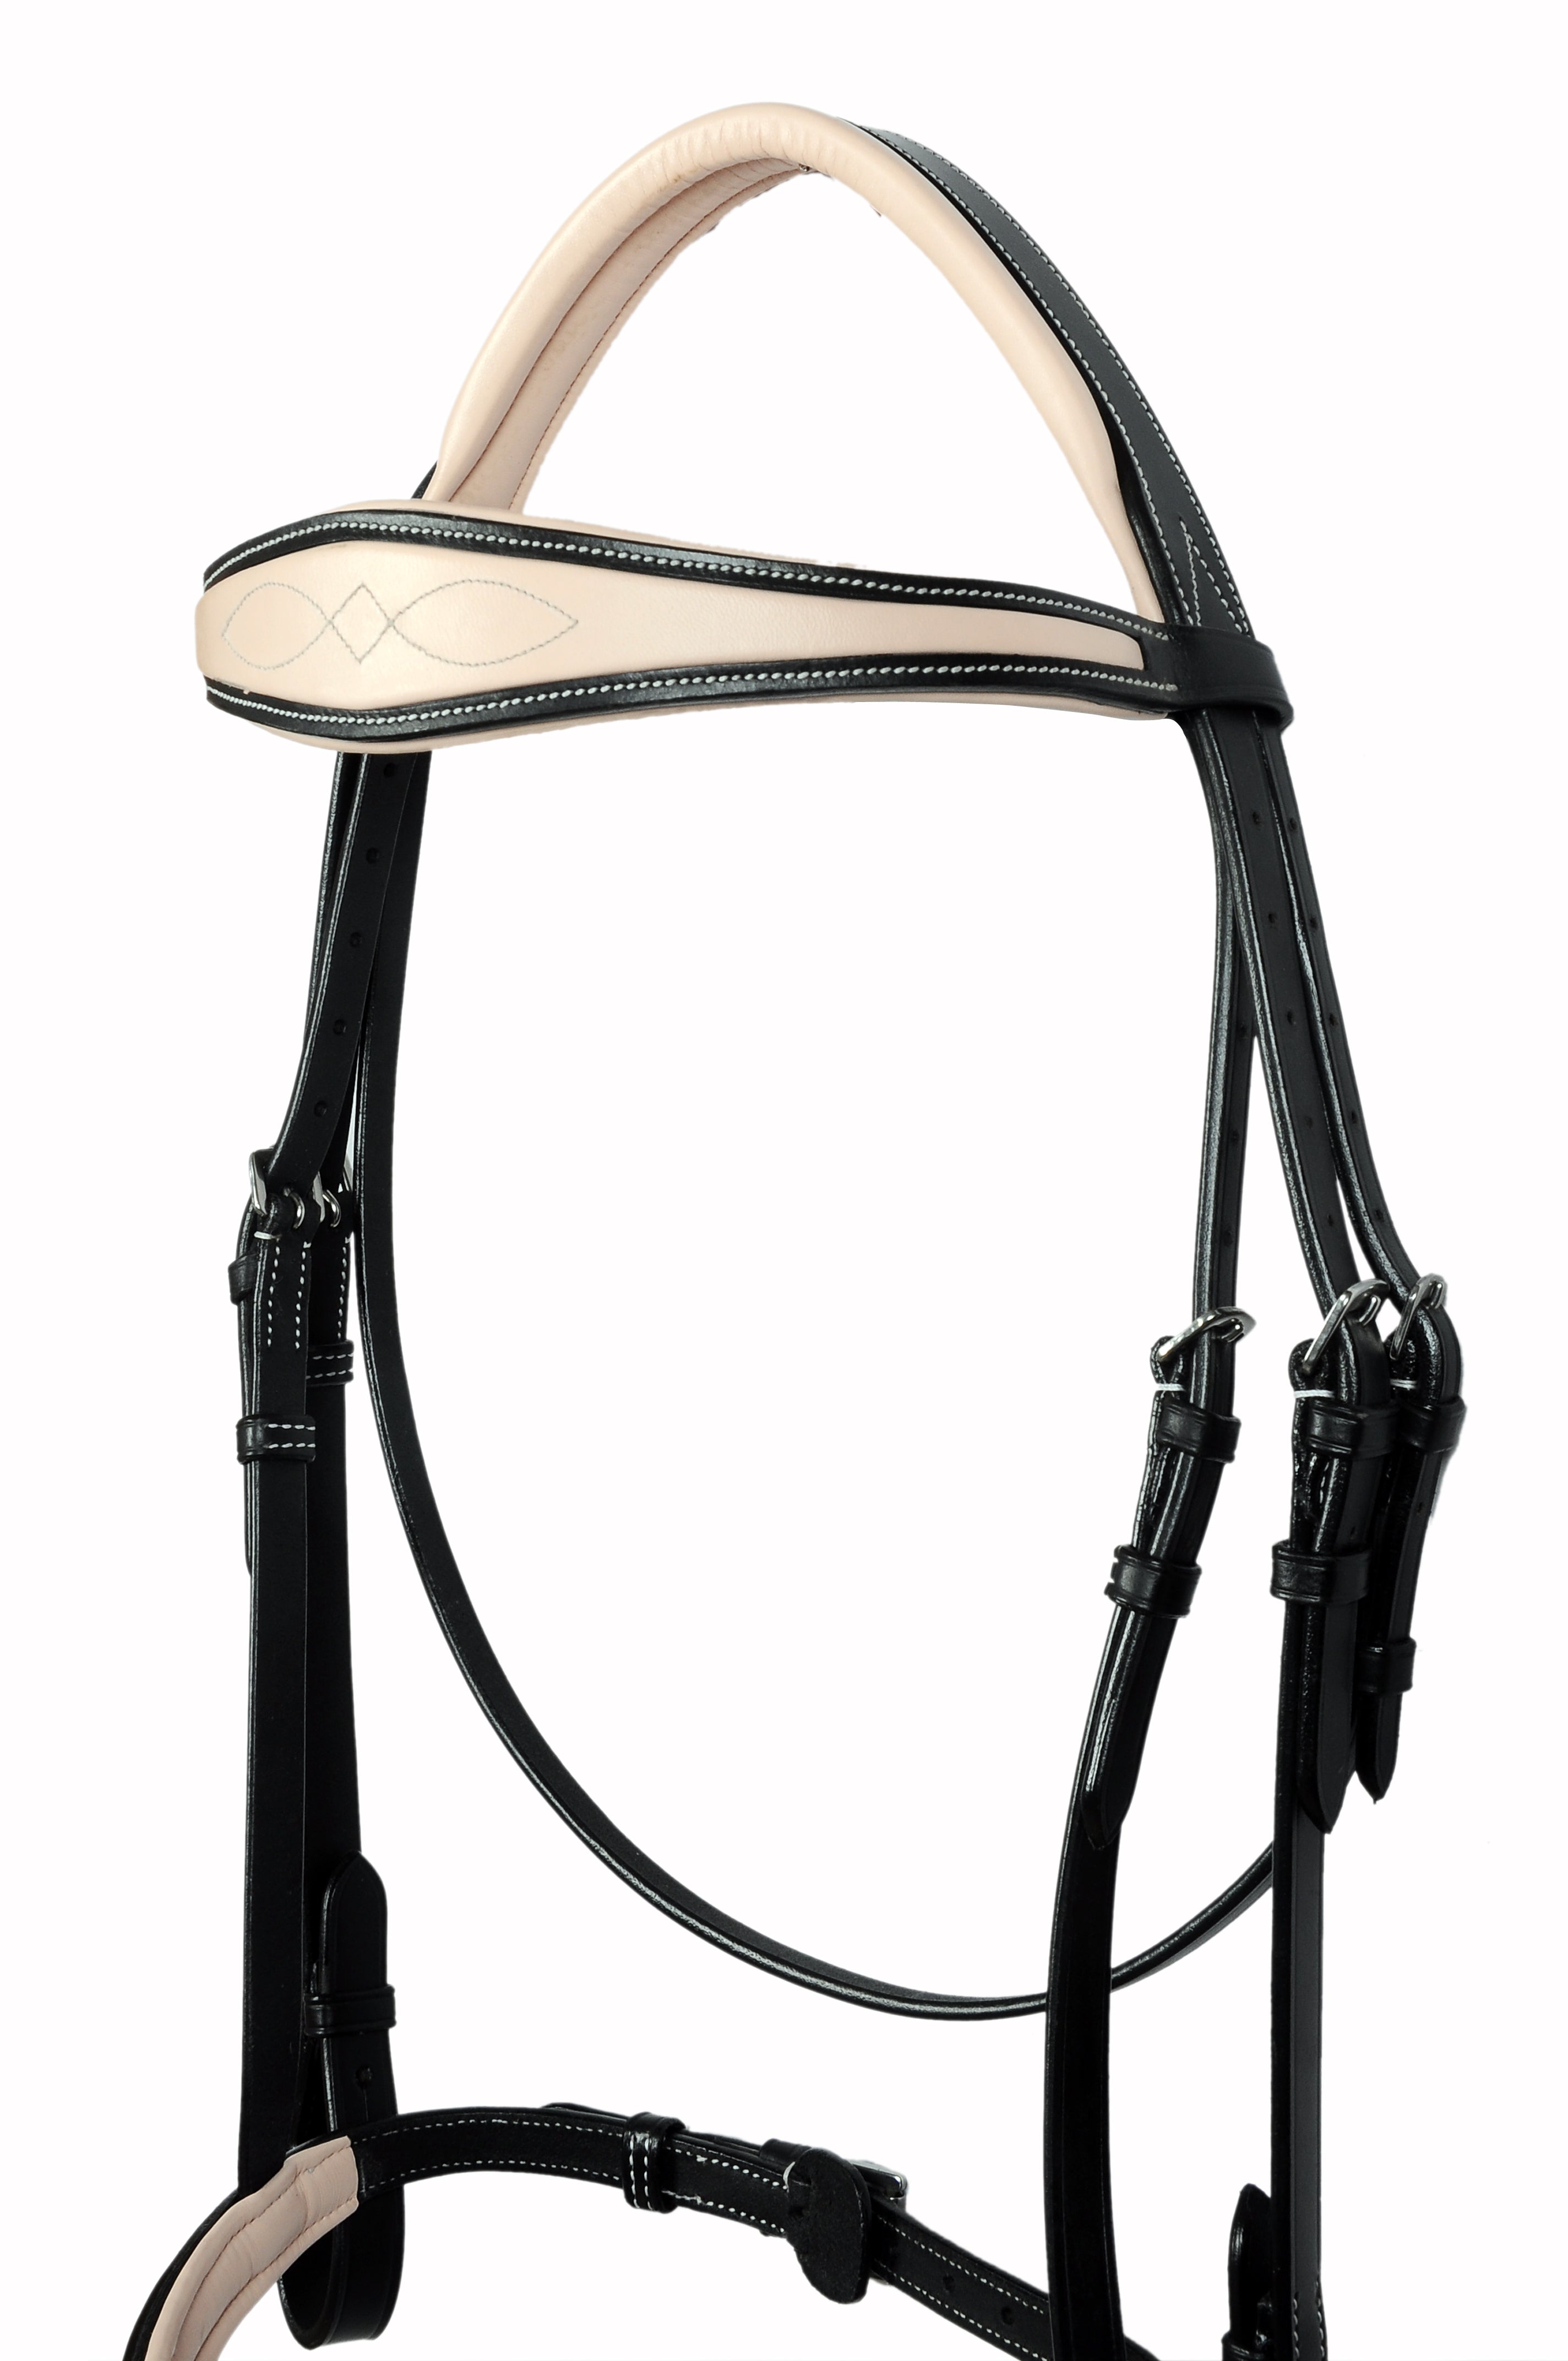 Padded Fancy Stitched Leather Jump Bridle